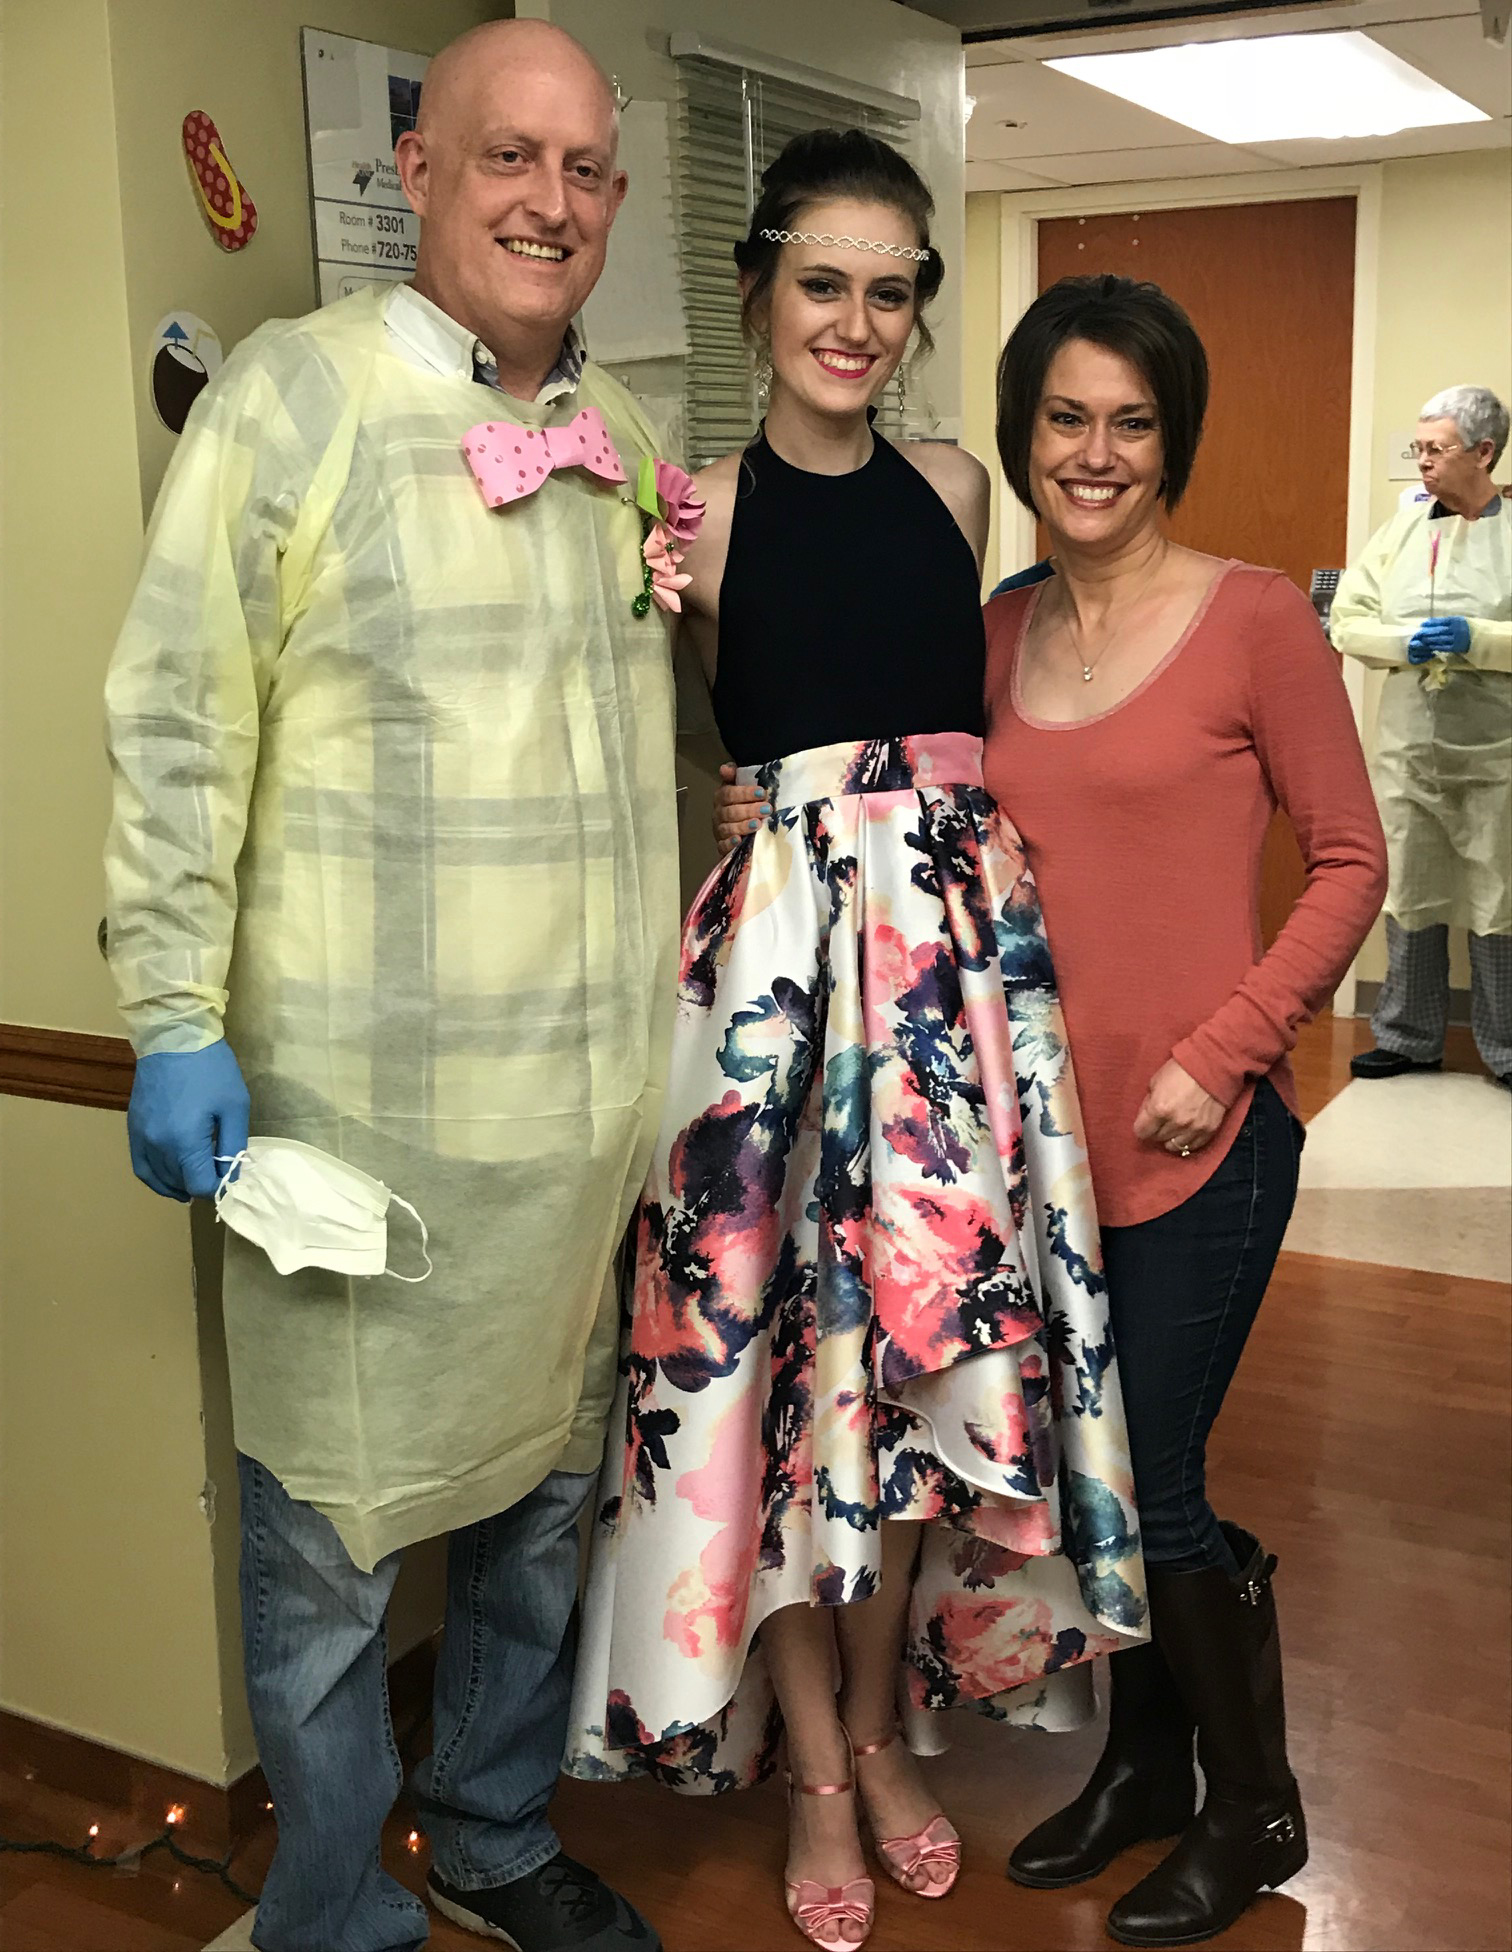 Girl wearing prom dress posing for a photo with her parents in hospital room